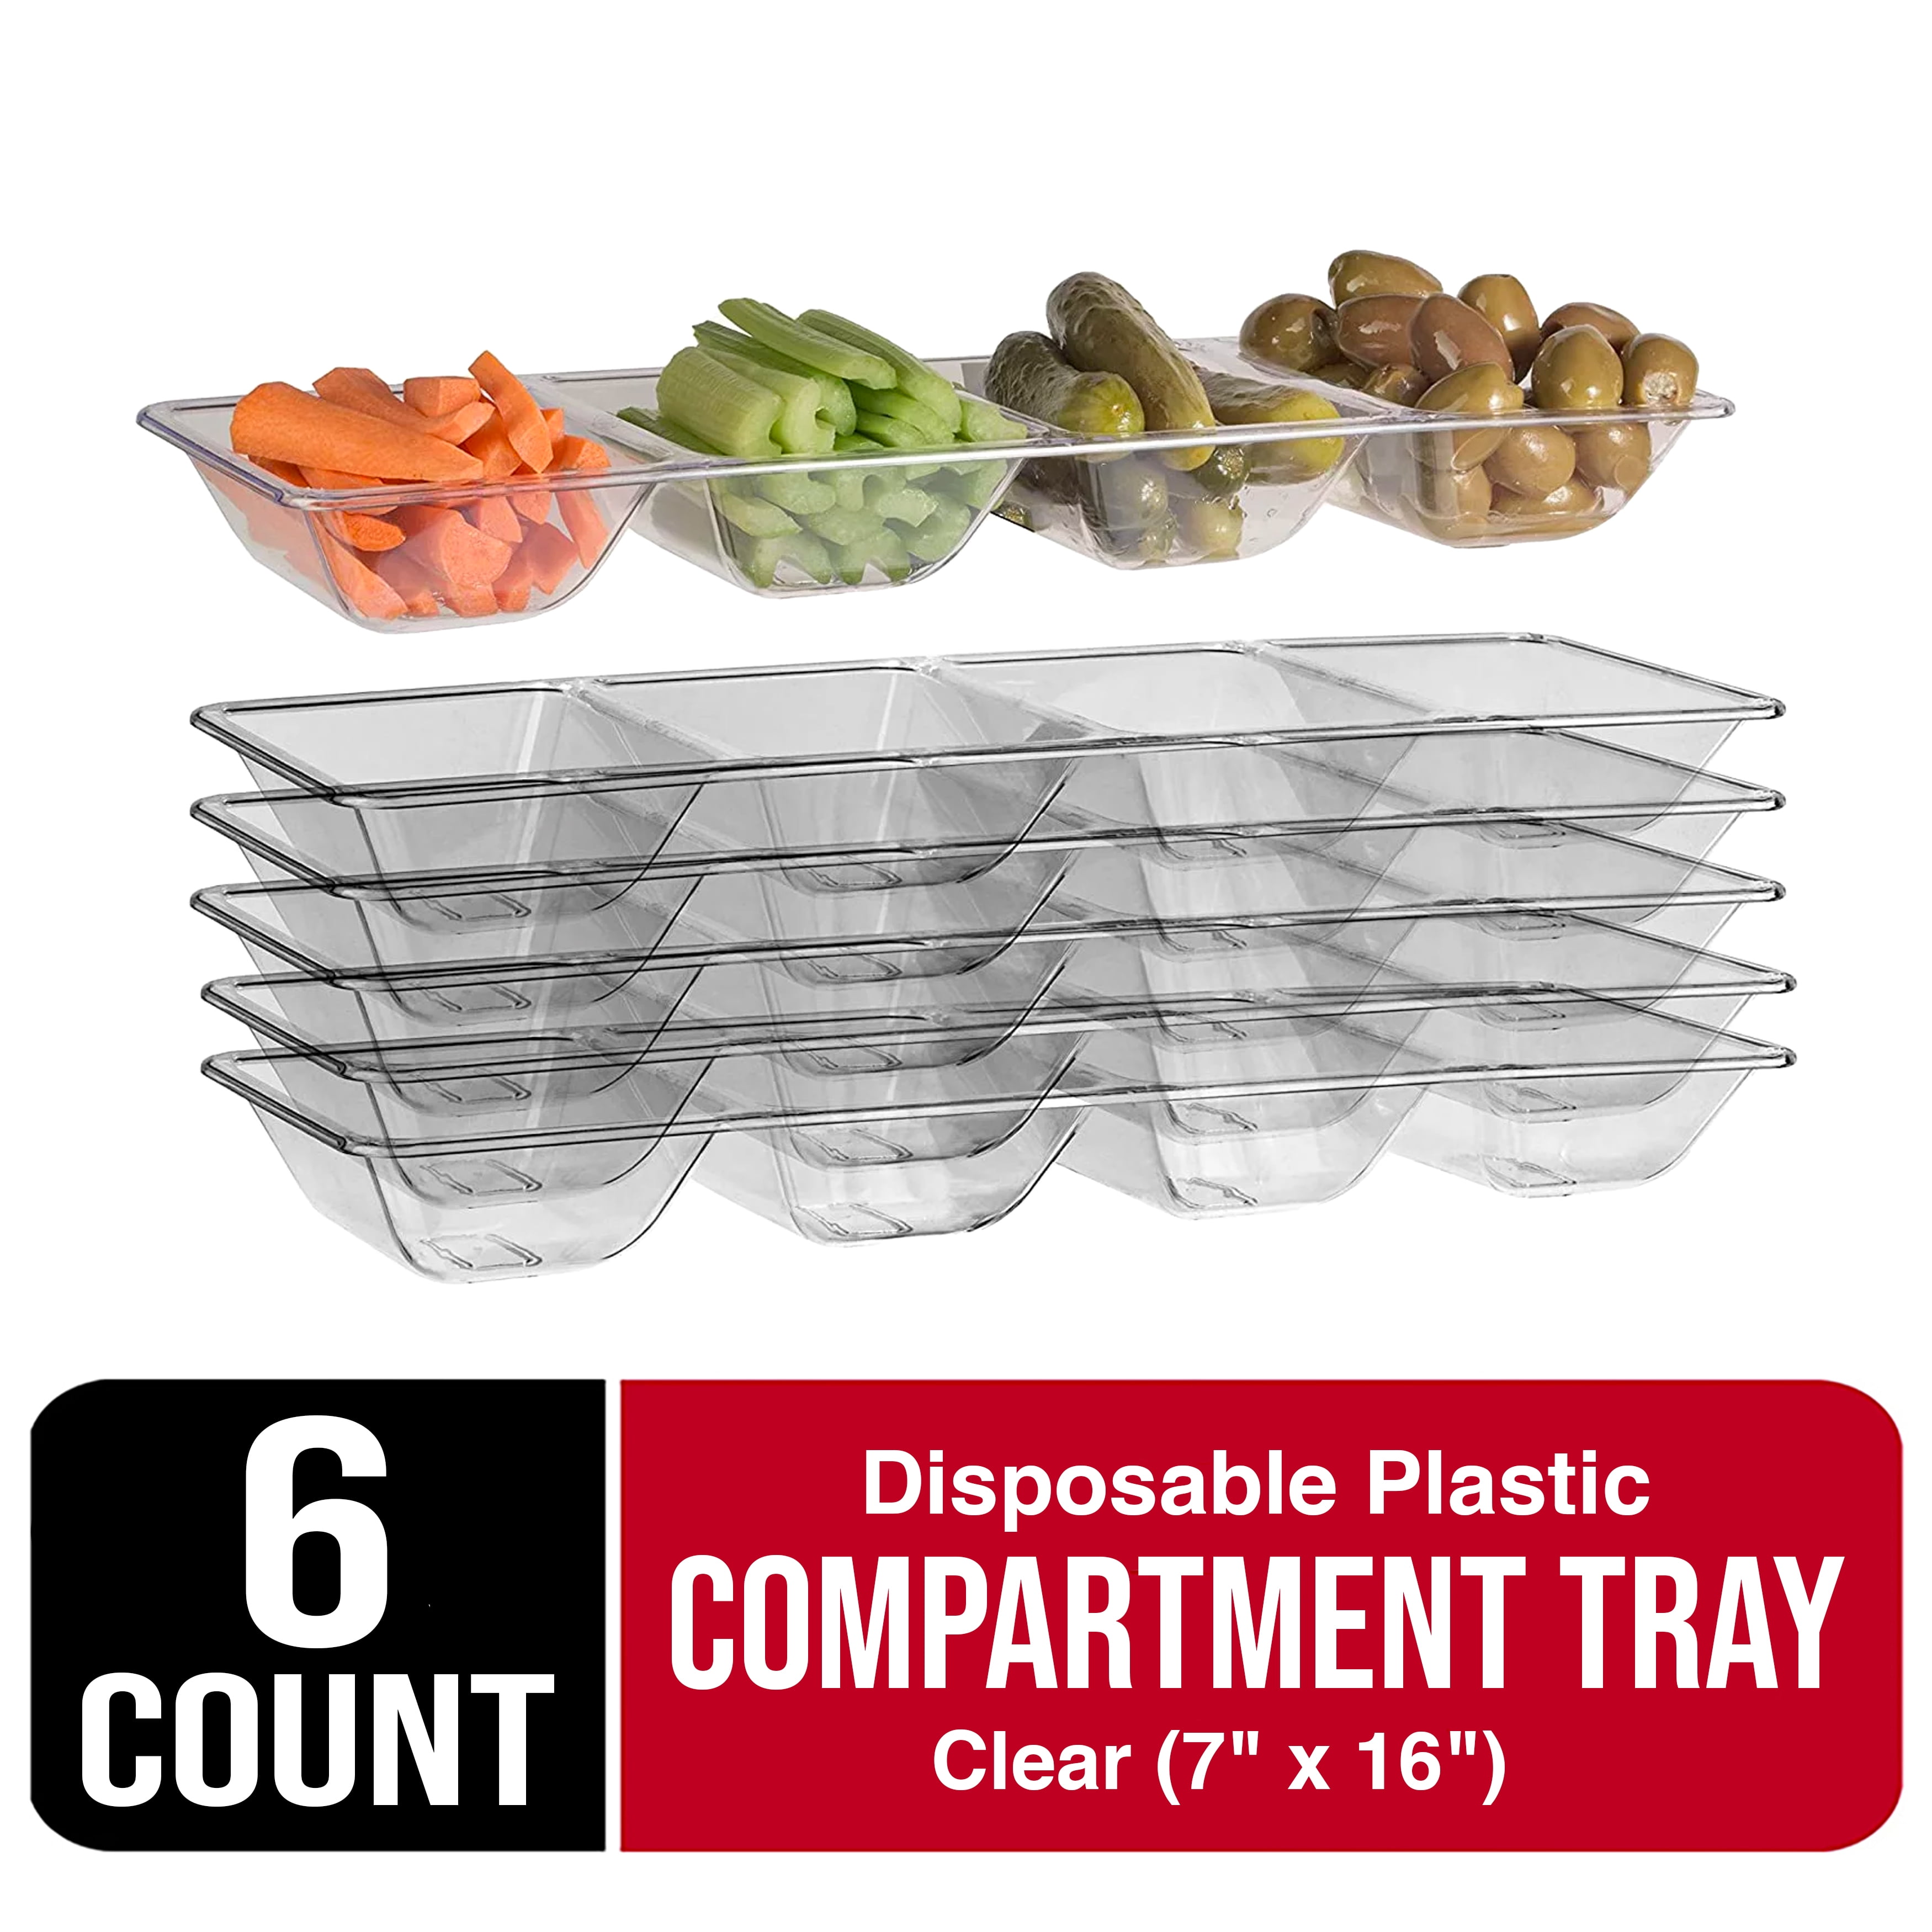 Exquisite 6 Count White Plastic Compartment Tray for Parties Heavy Duty Serving Tray with Compartments for Food Disposable Sectional Party Trays and P